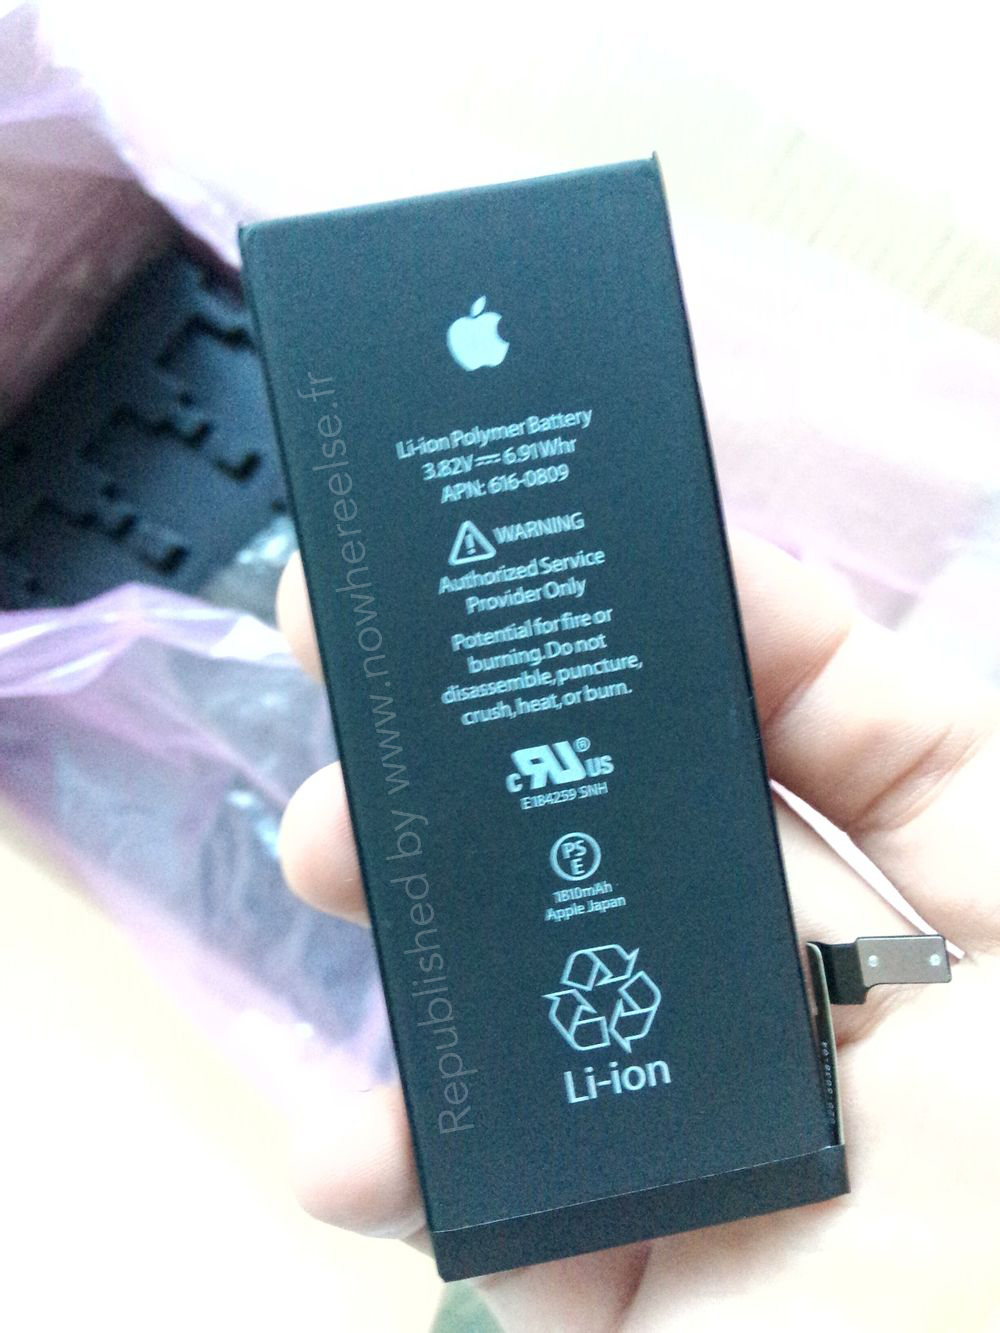 More Photos of Purported 1810 mAh Battery for 4.7-inch iPhone 6 Surface